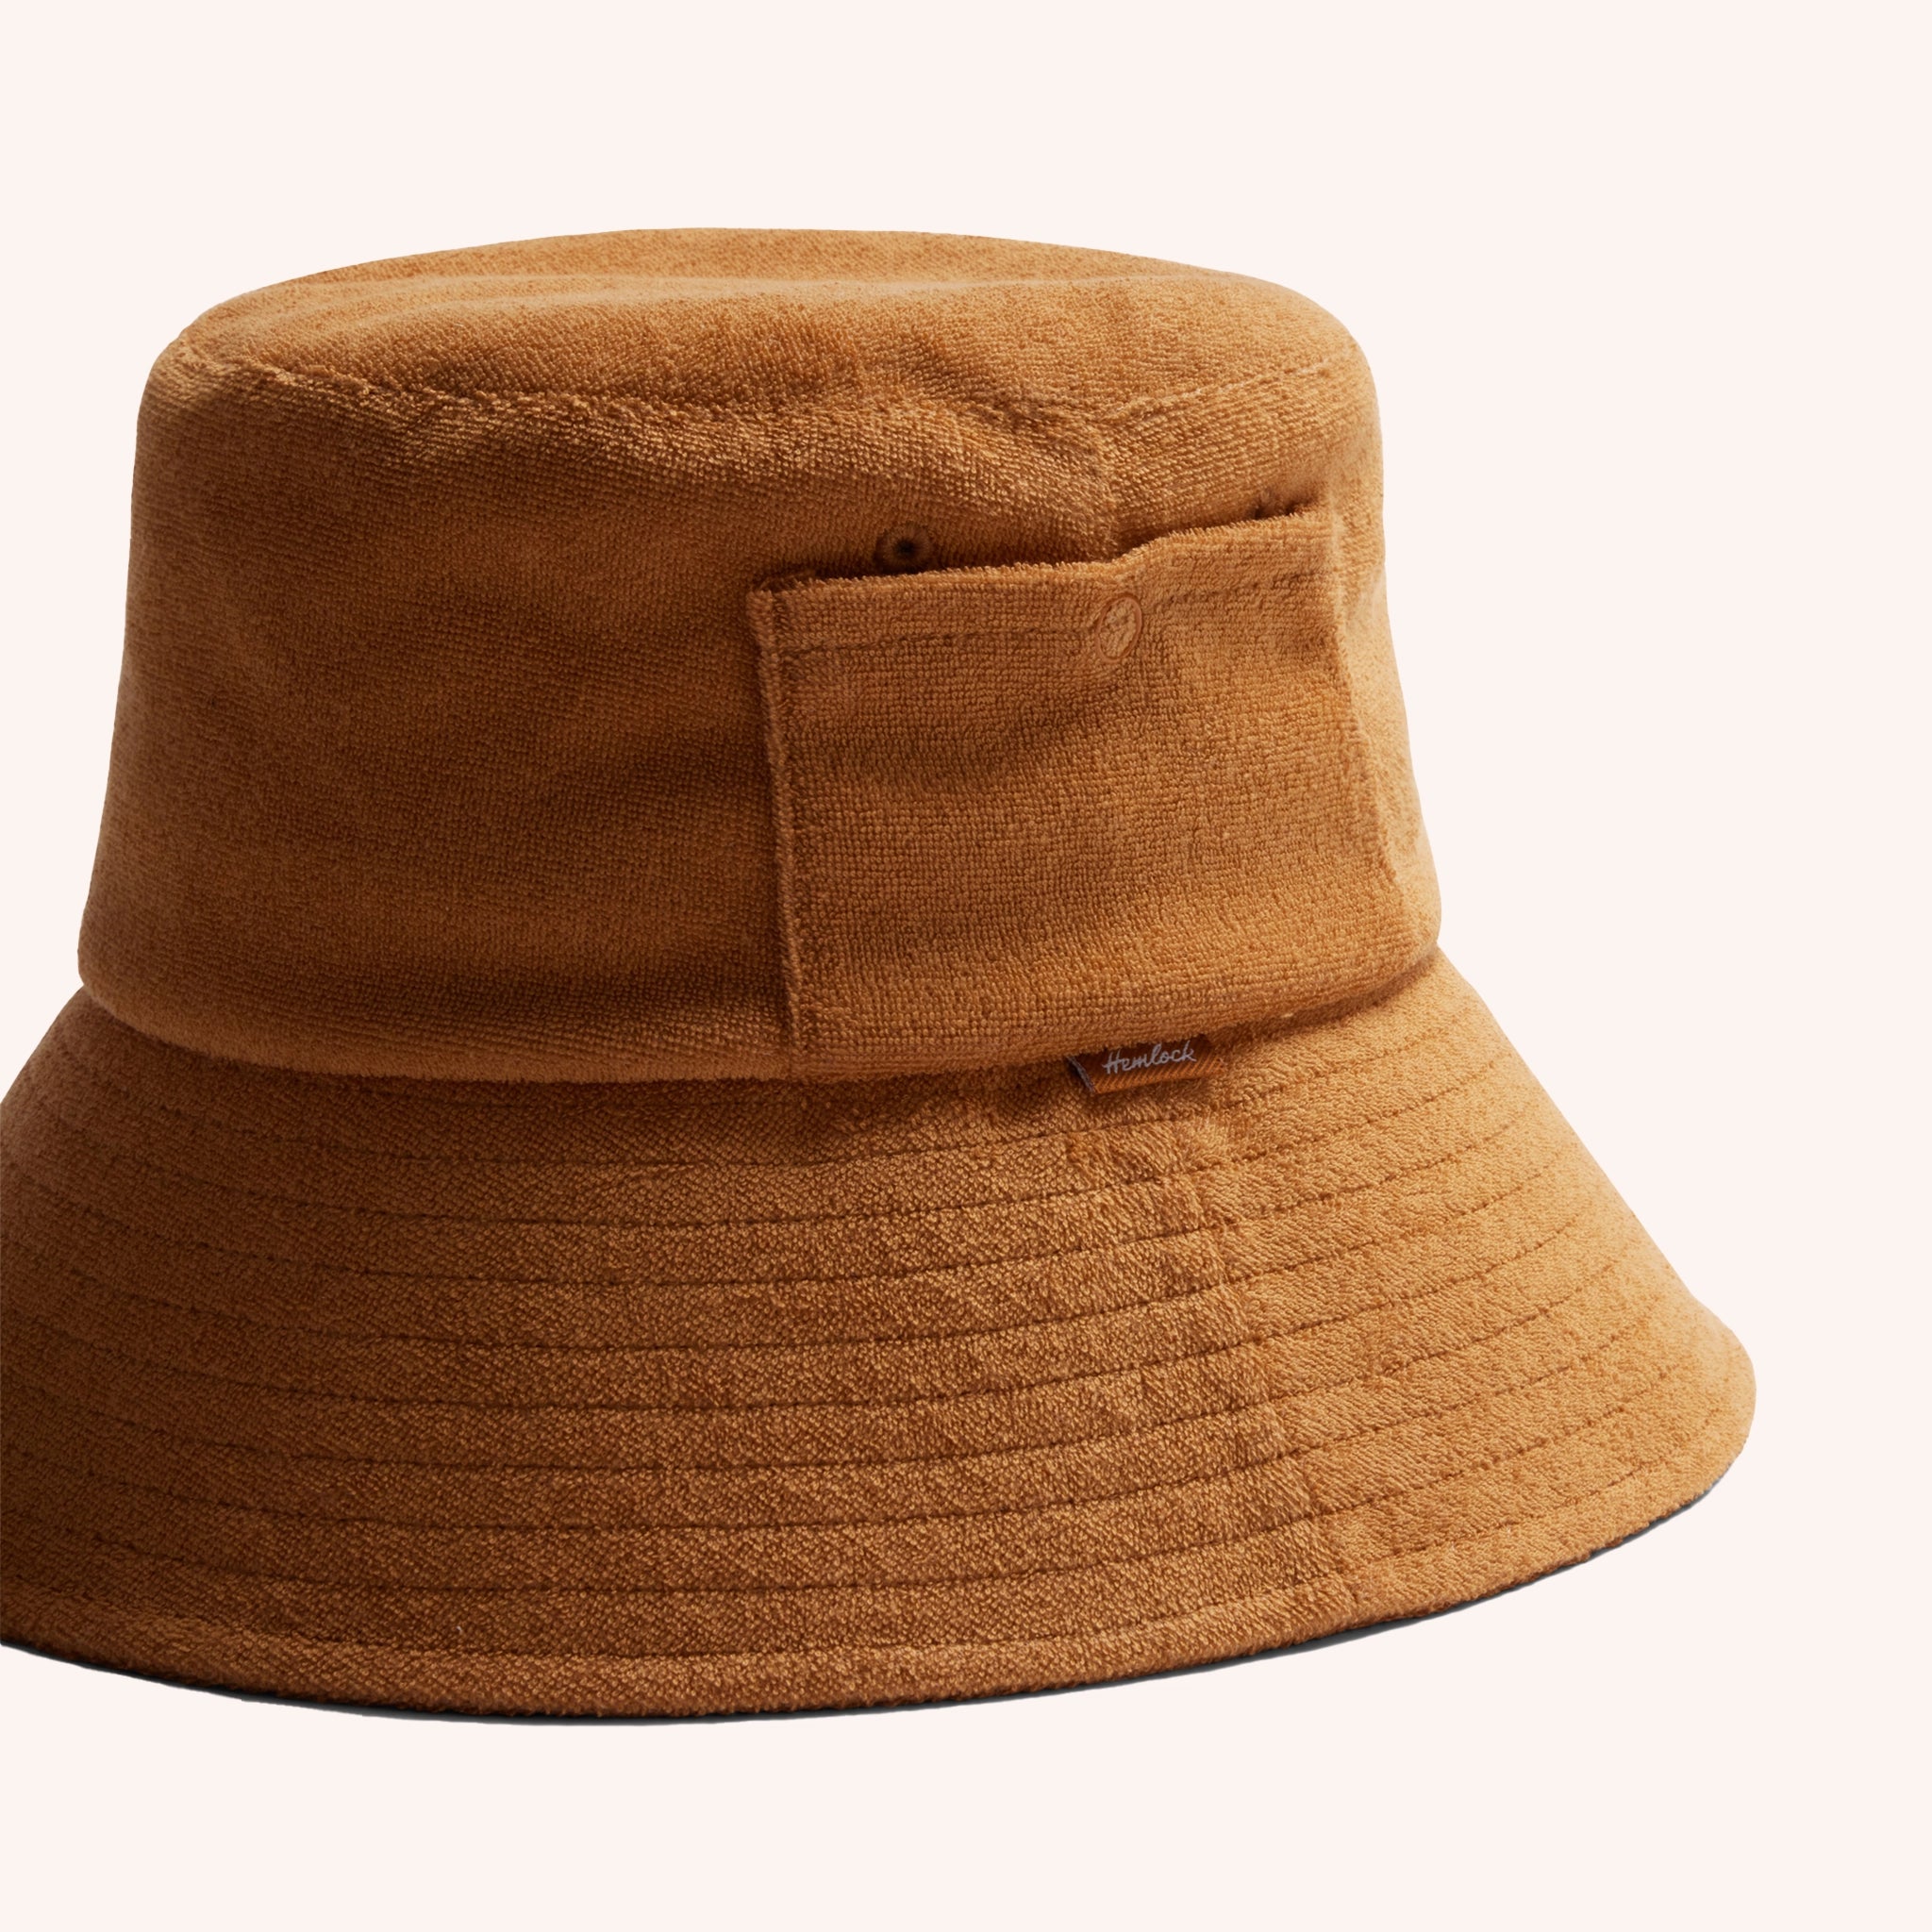 A cotton bucket hat in a dark yellow shade with a ribbed brim and a small side pocket.